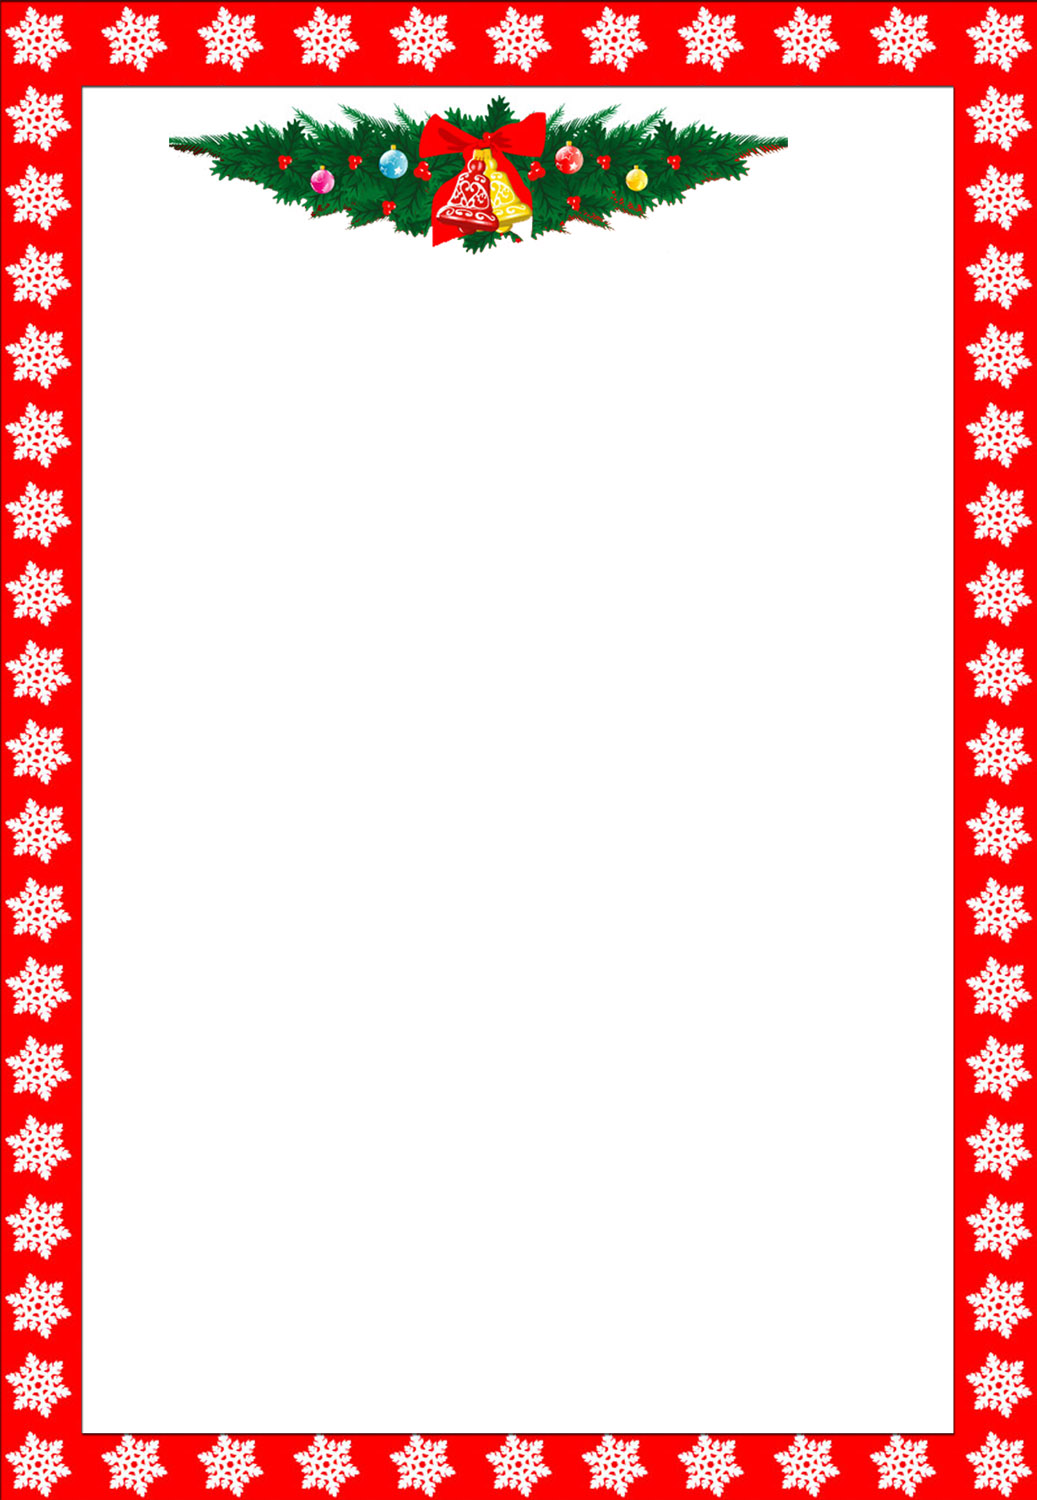 Free Christmas Borders 020511  Vector Clip Art   Free Clipart Images